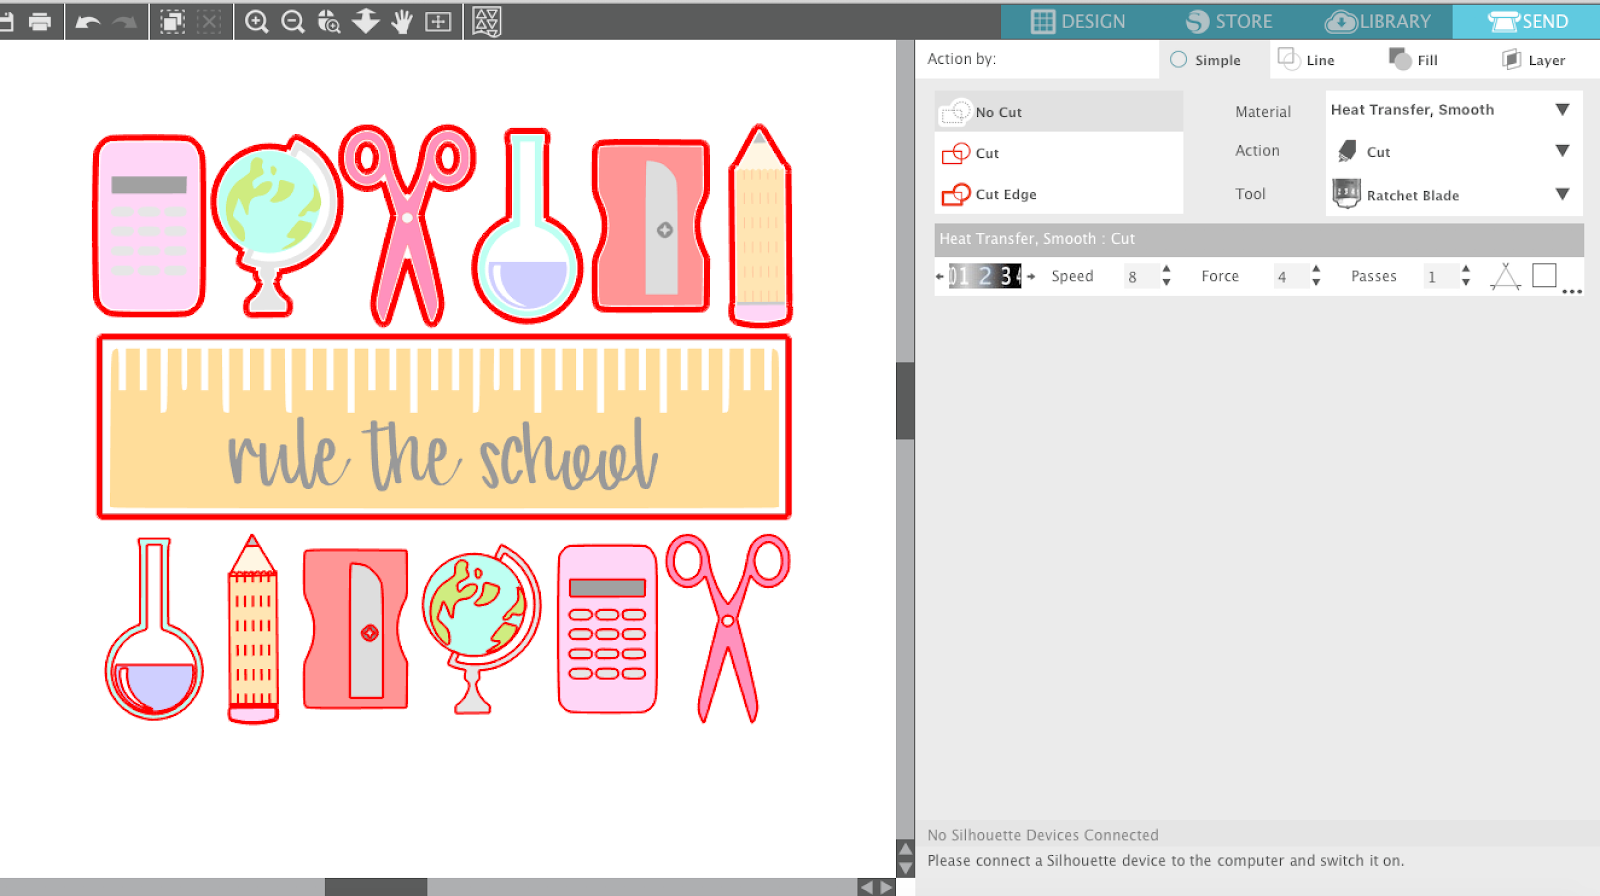 Download Free Silhouette School Design Set 7 Cut Files 2 Ways For Print And Cut And Layering Silhouette School